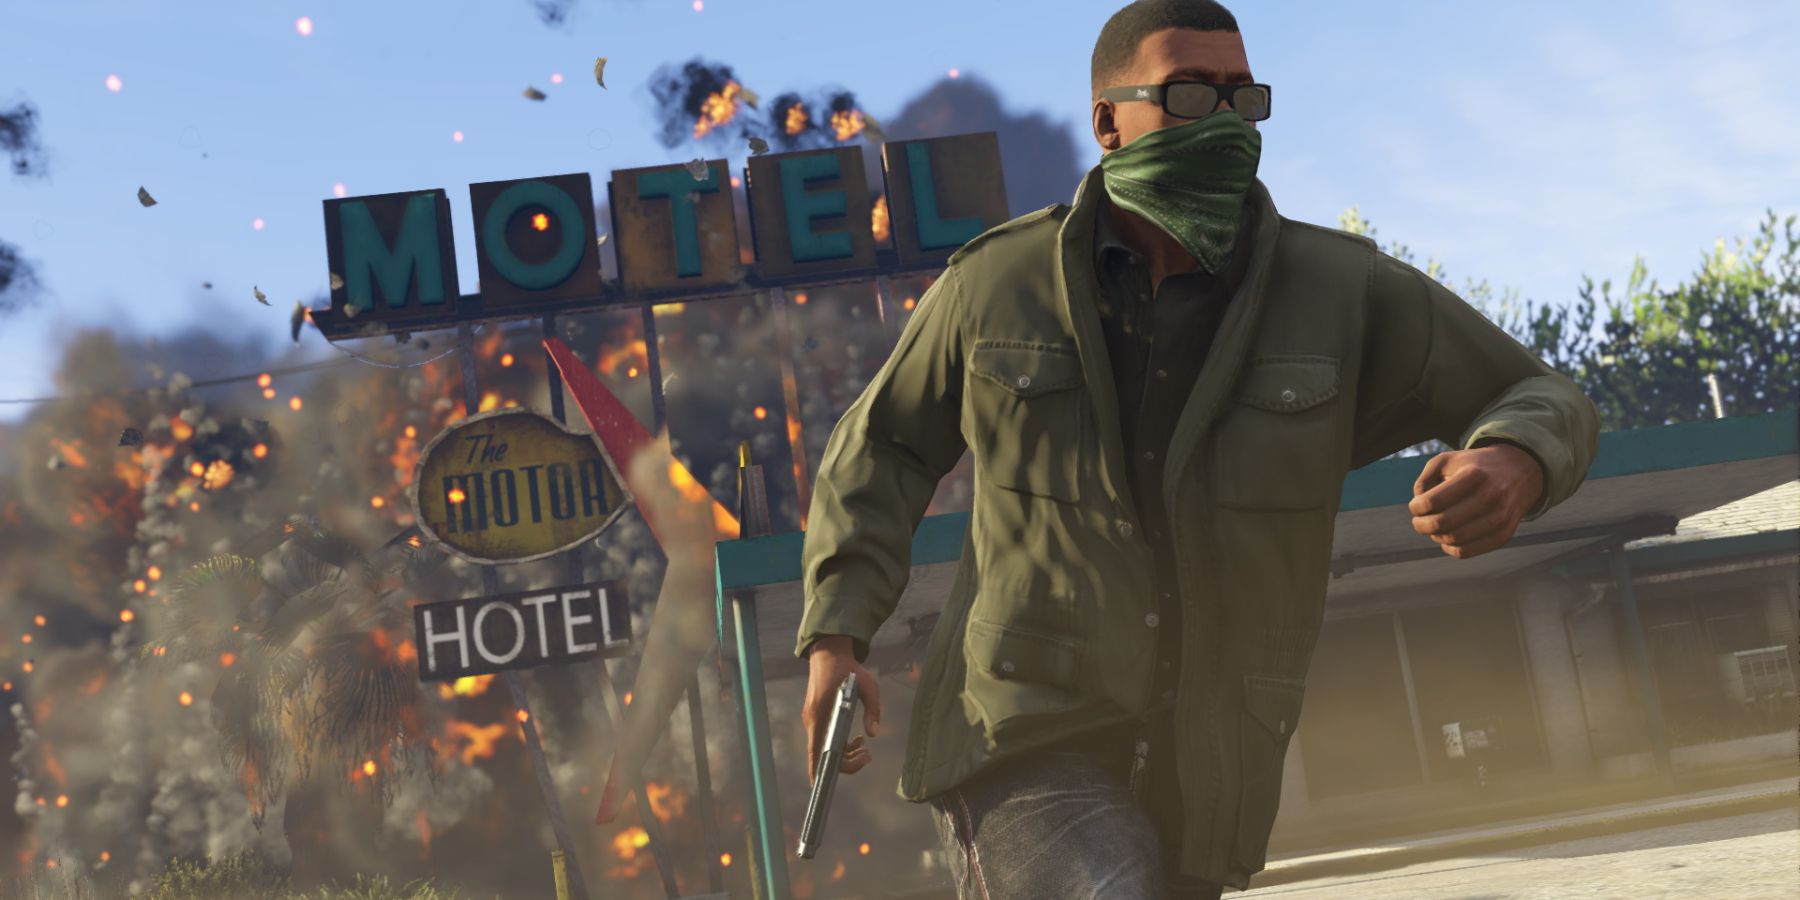 GTA5 PS5 Price Revealed, Will Cost $10 Until June, $20 After; GTA